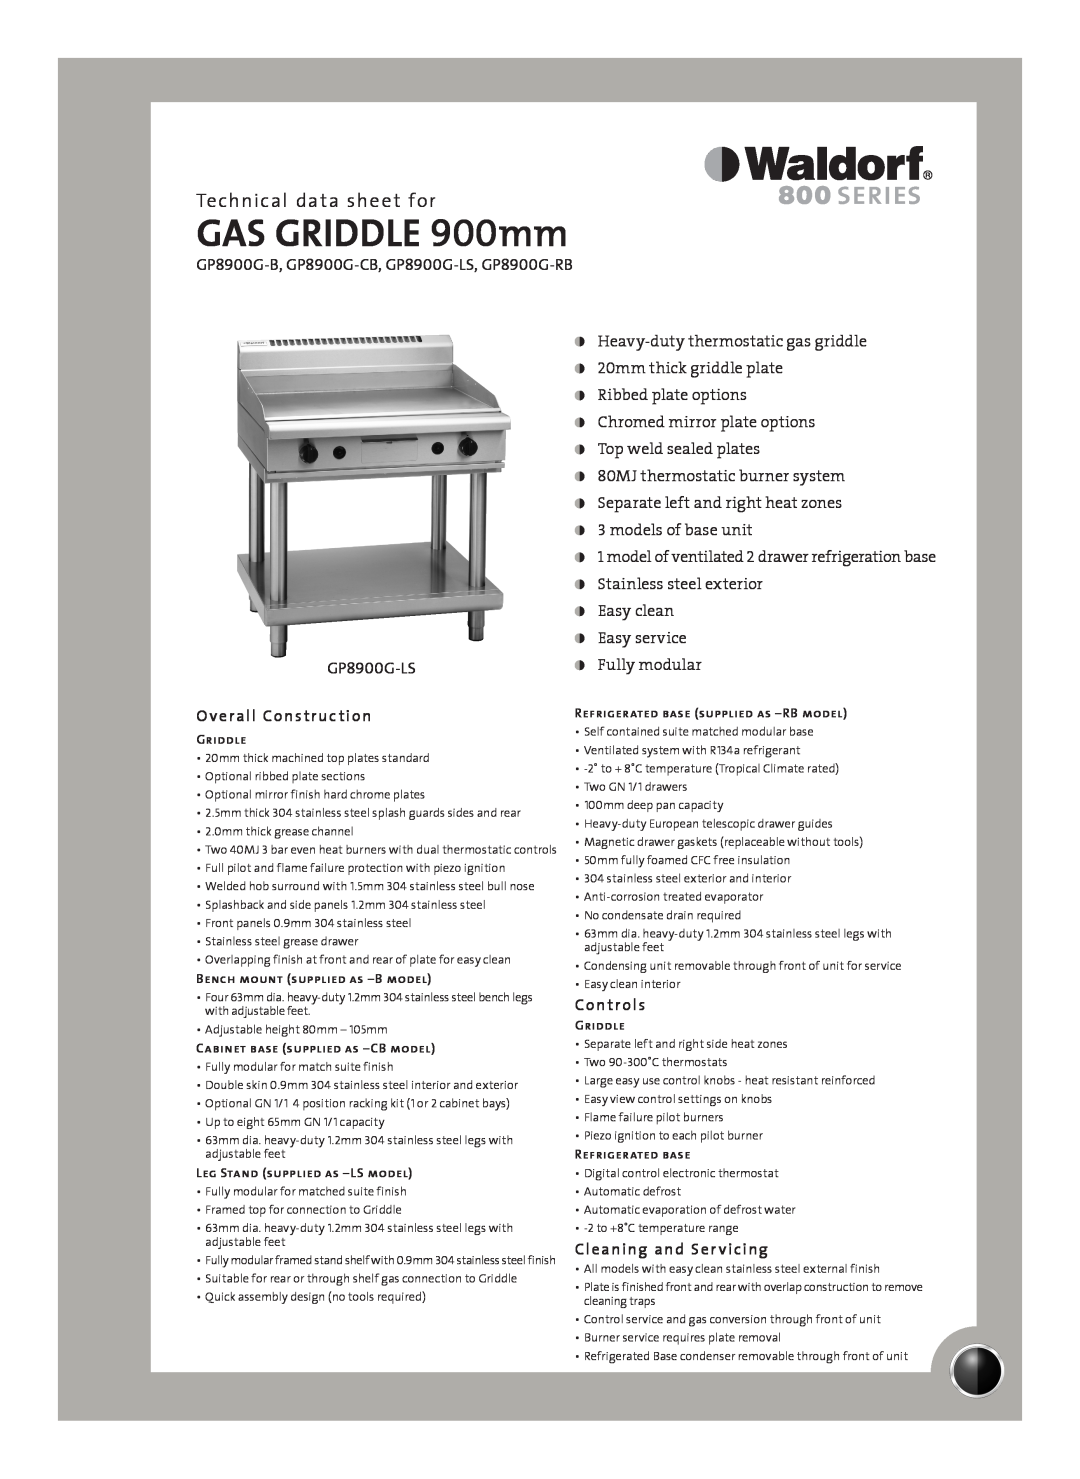 Moffat GP8900G-RB, GP8900G-LS manual Technical data sheet for, Overall Construction, Controls, Cleaning and Ser vicing 